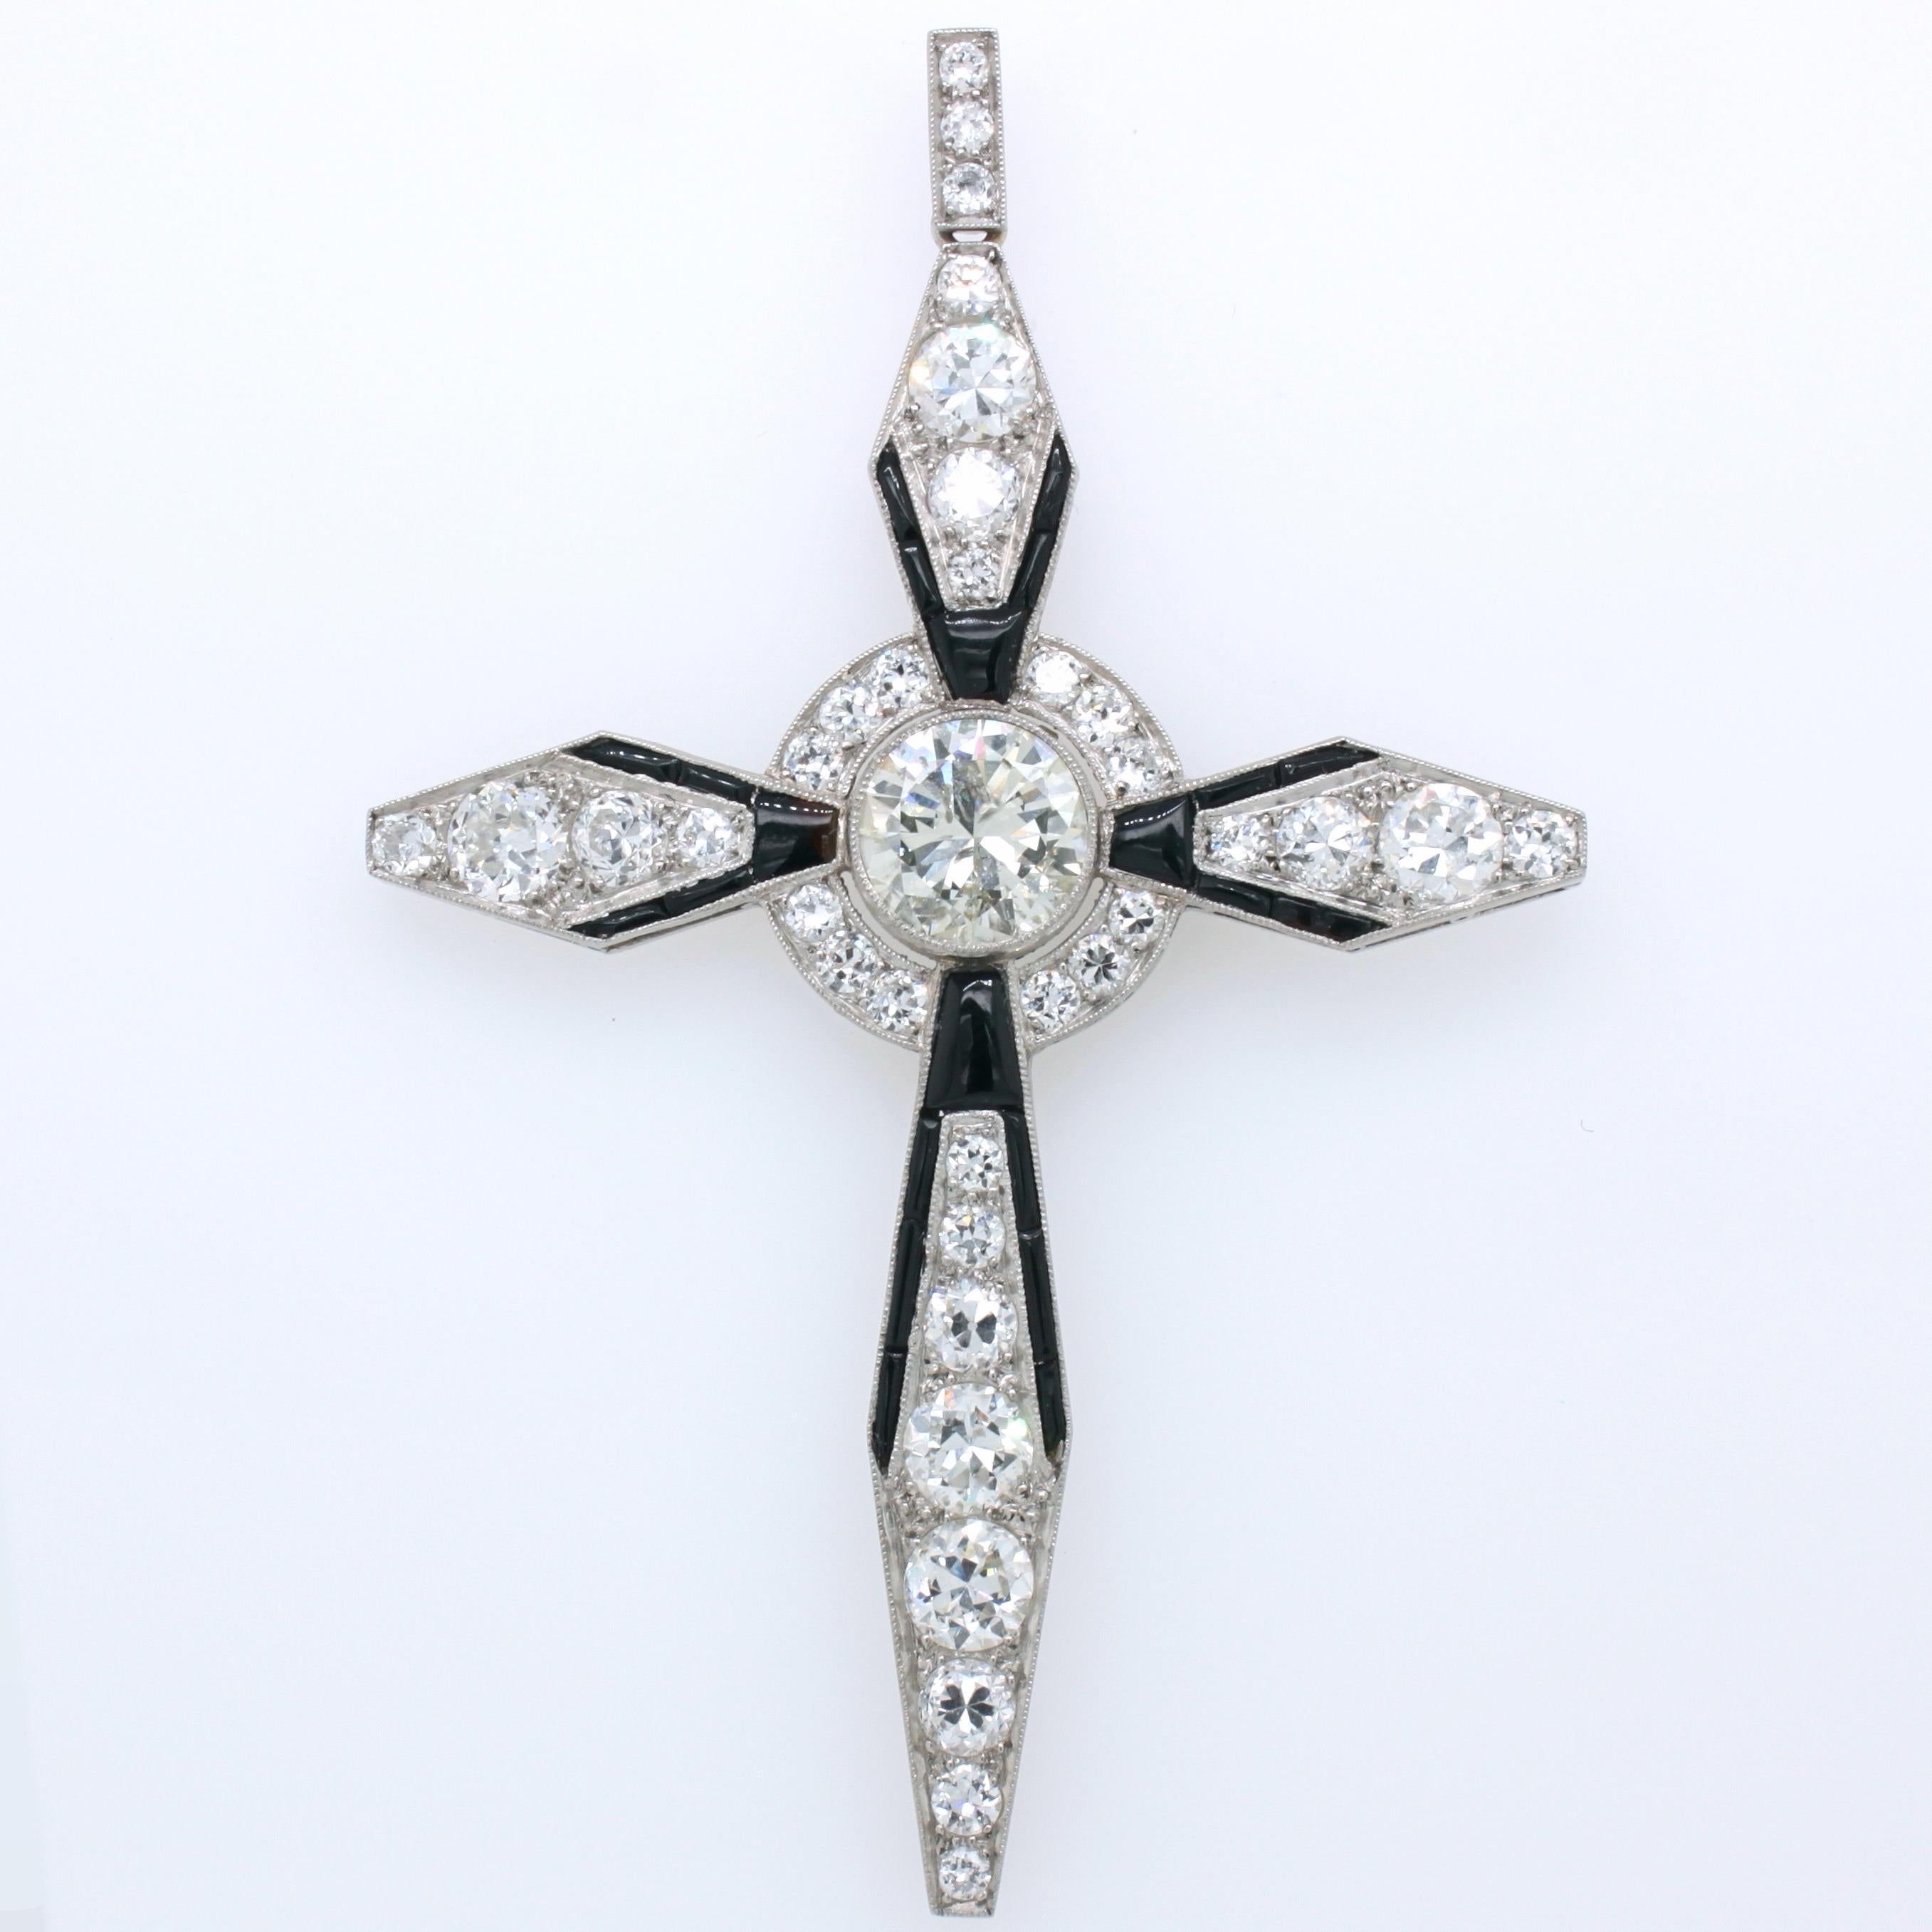 A unique and spectacular Art Deco diamond and onyx cross pendant, ca. 1920s. The big centre diamond weighs approximately 2.1 carats (J/K colour and SI/PK clarity). It is surrounded by a halo of smaller diamonds. The design of each of the cross arms